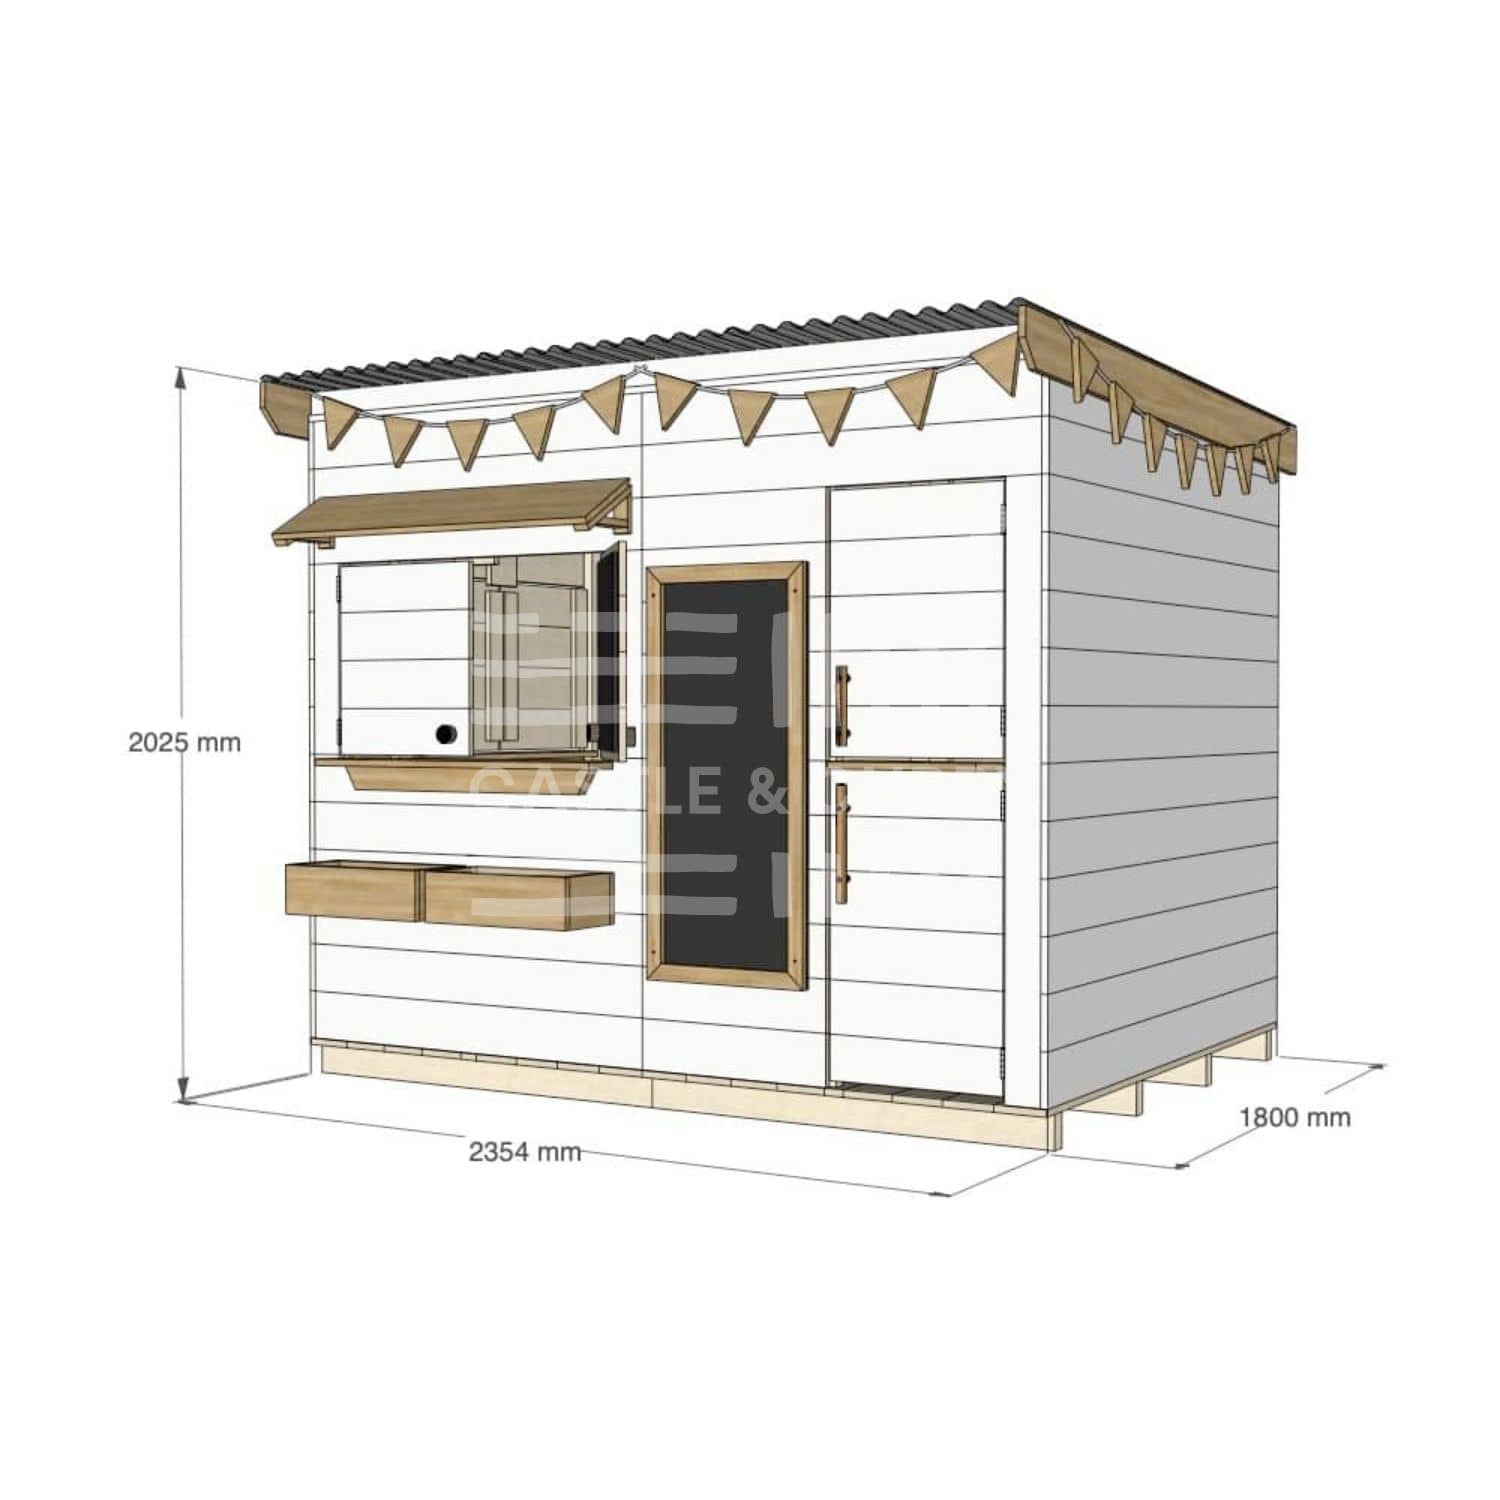 Flat roof extended height painted pine timber cubby house domestic large rectangle size with accessories